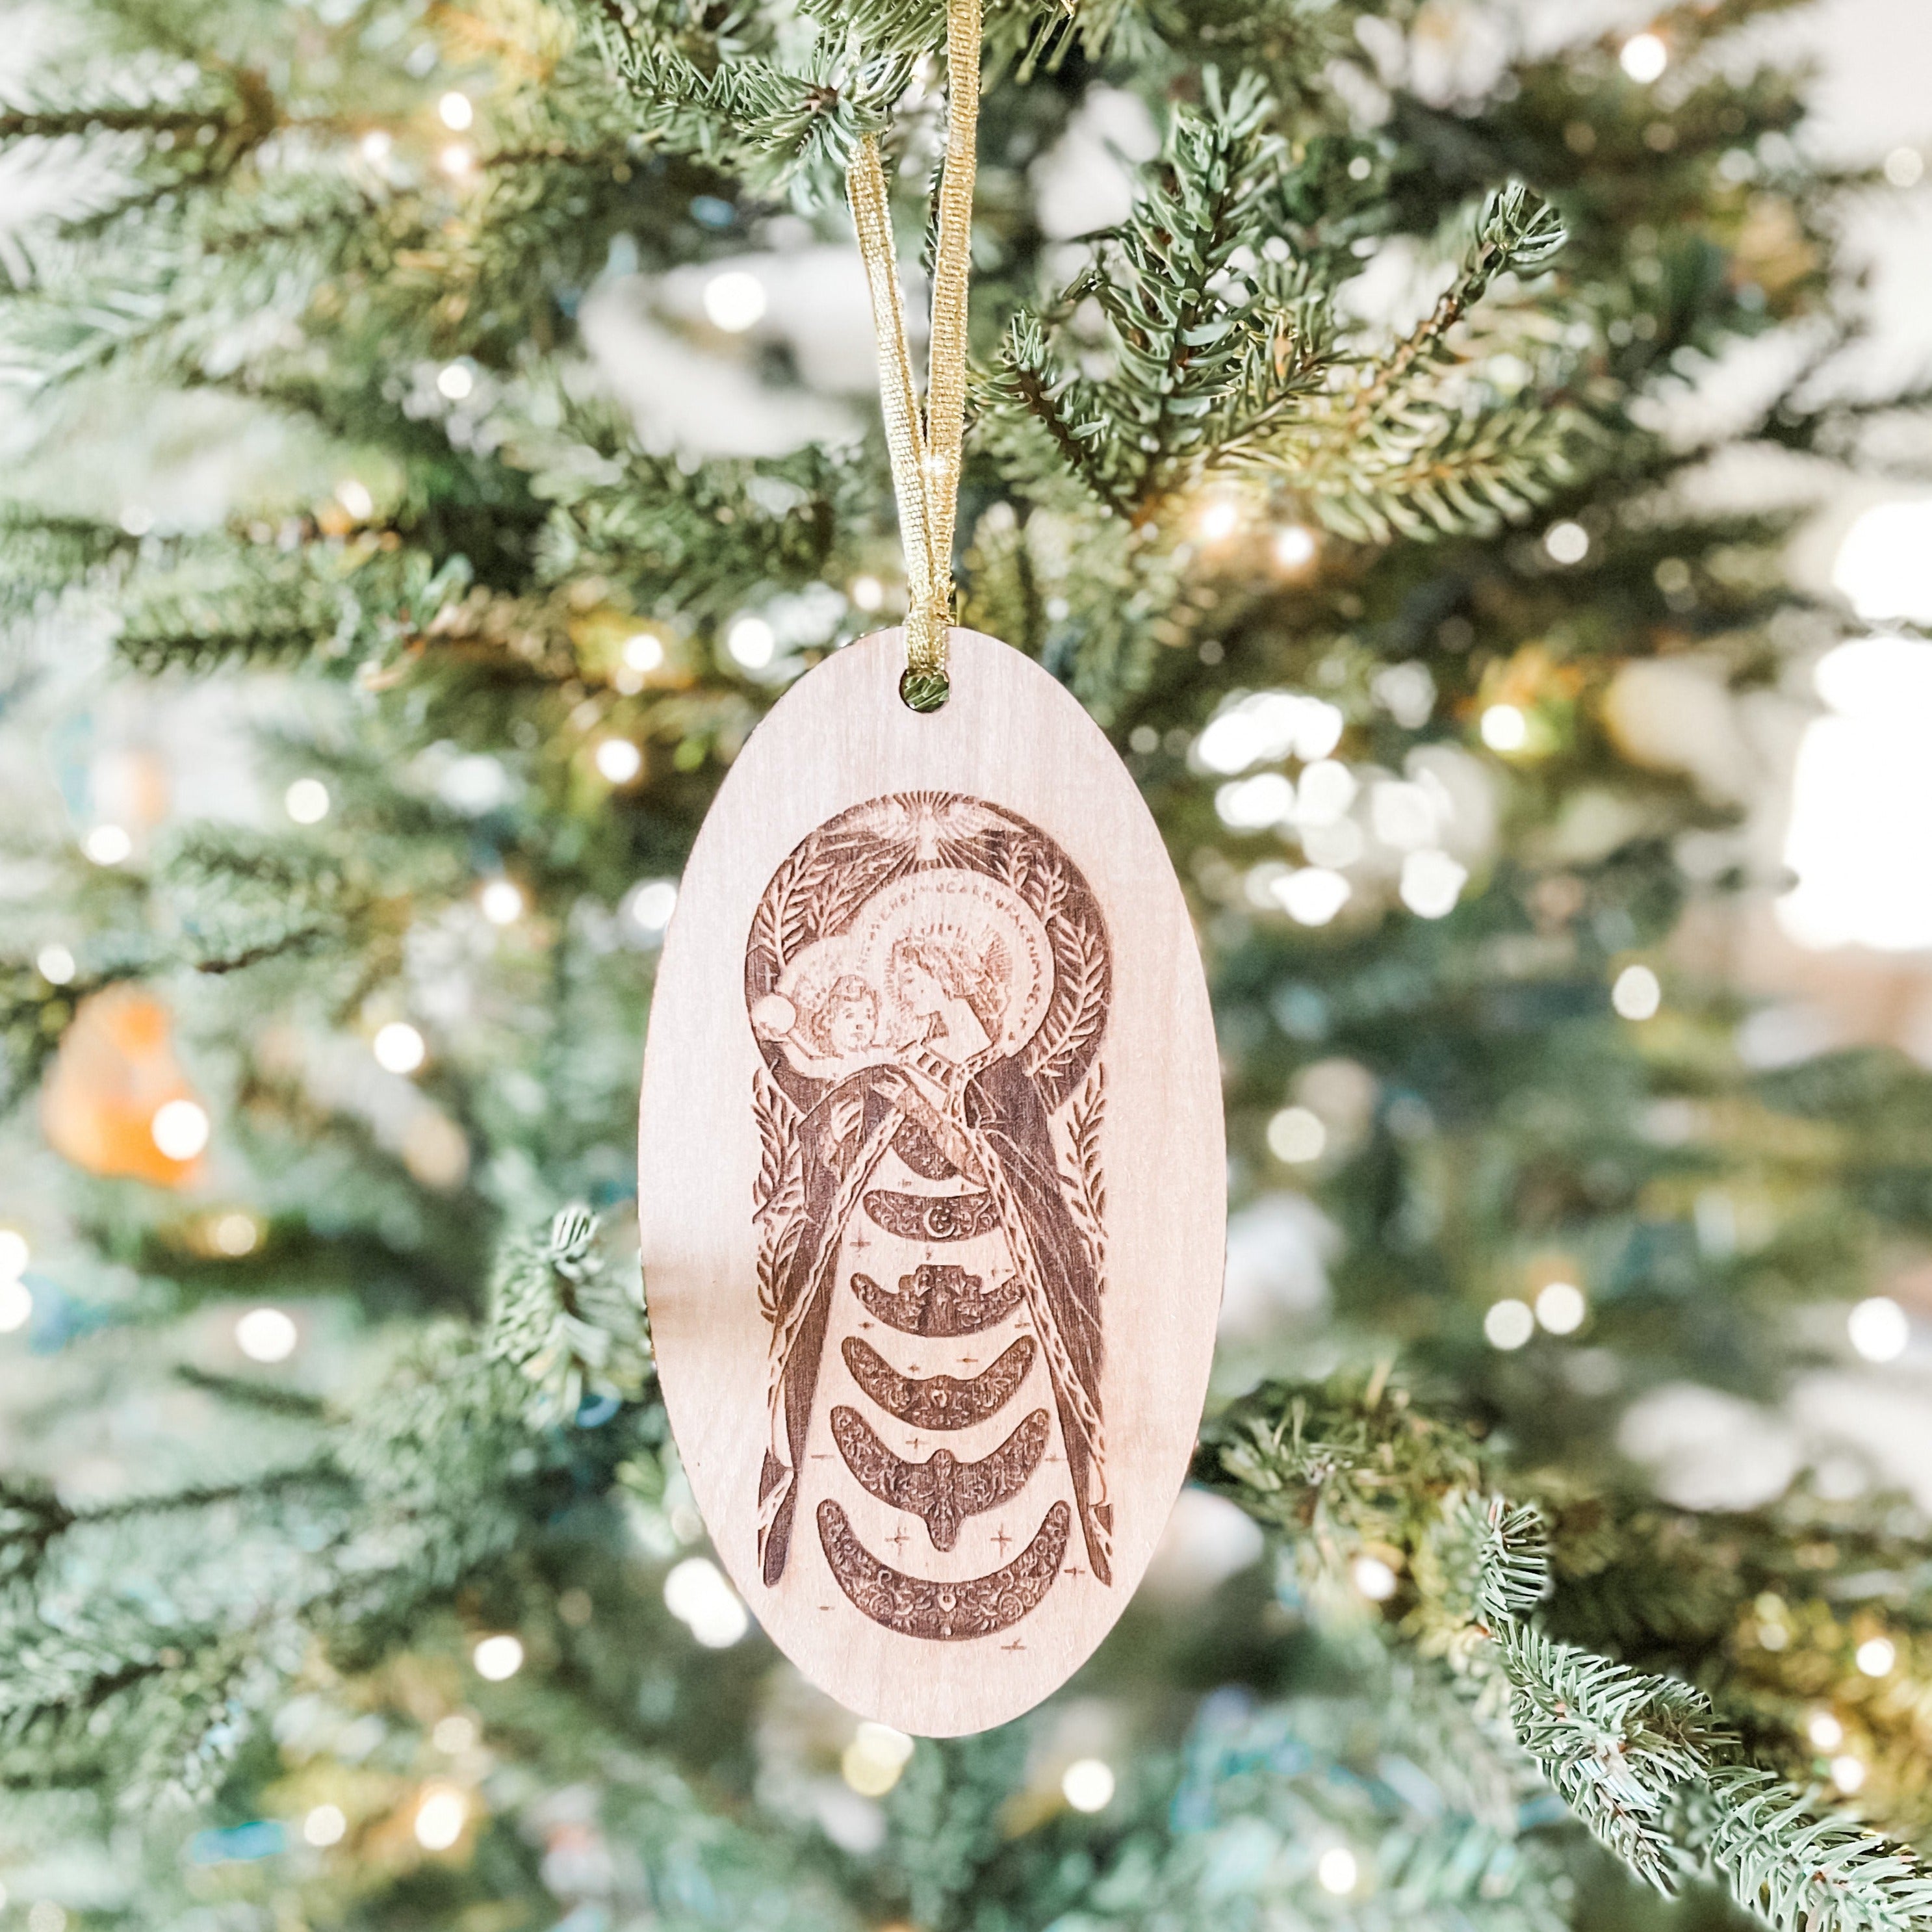 Our Lady or Loreto Wooden Ornament